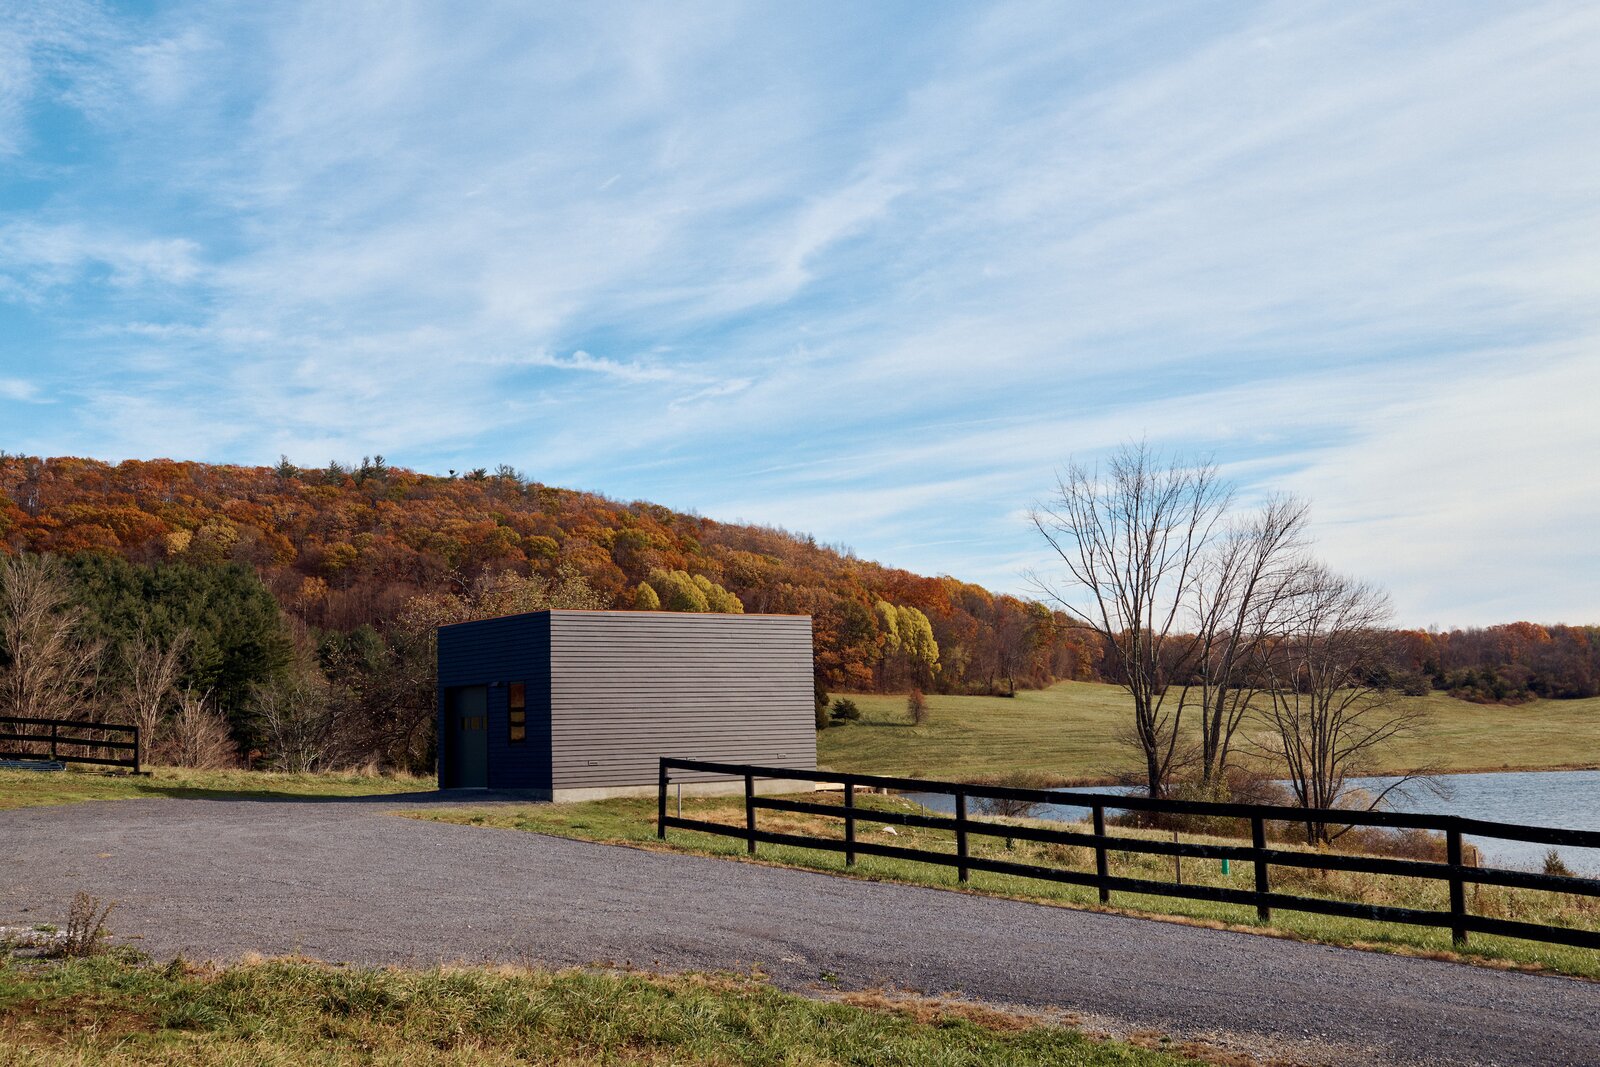 An Architect Designs a Tiny Painter’s Studio in Upstate New York for His Artist Mother